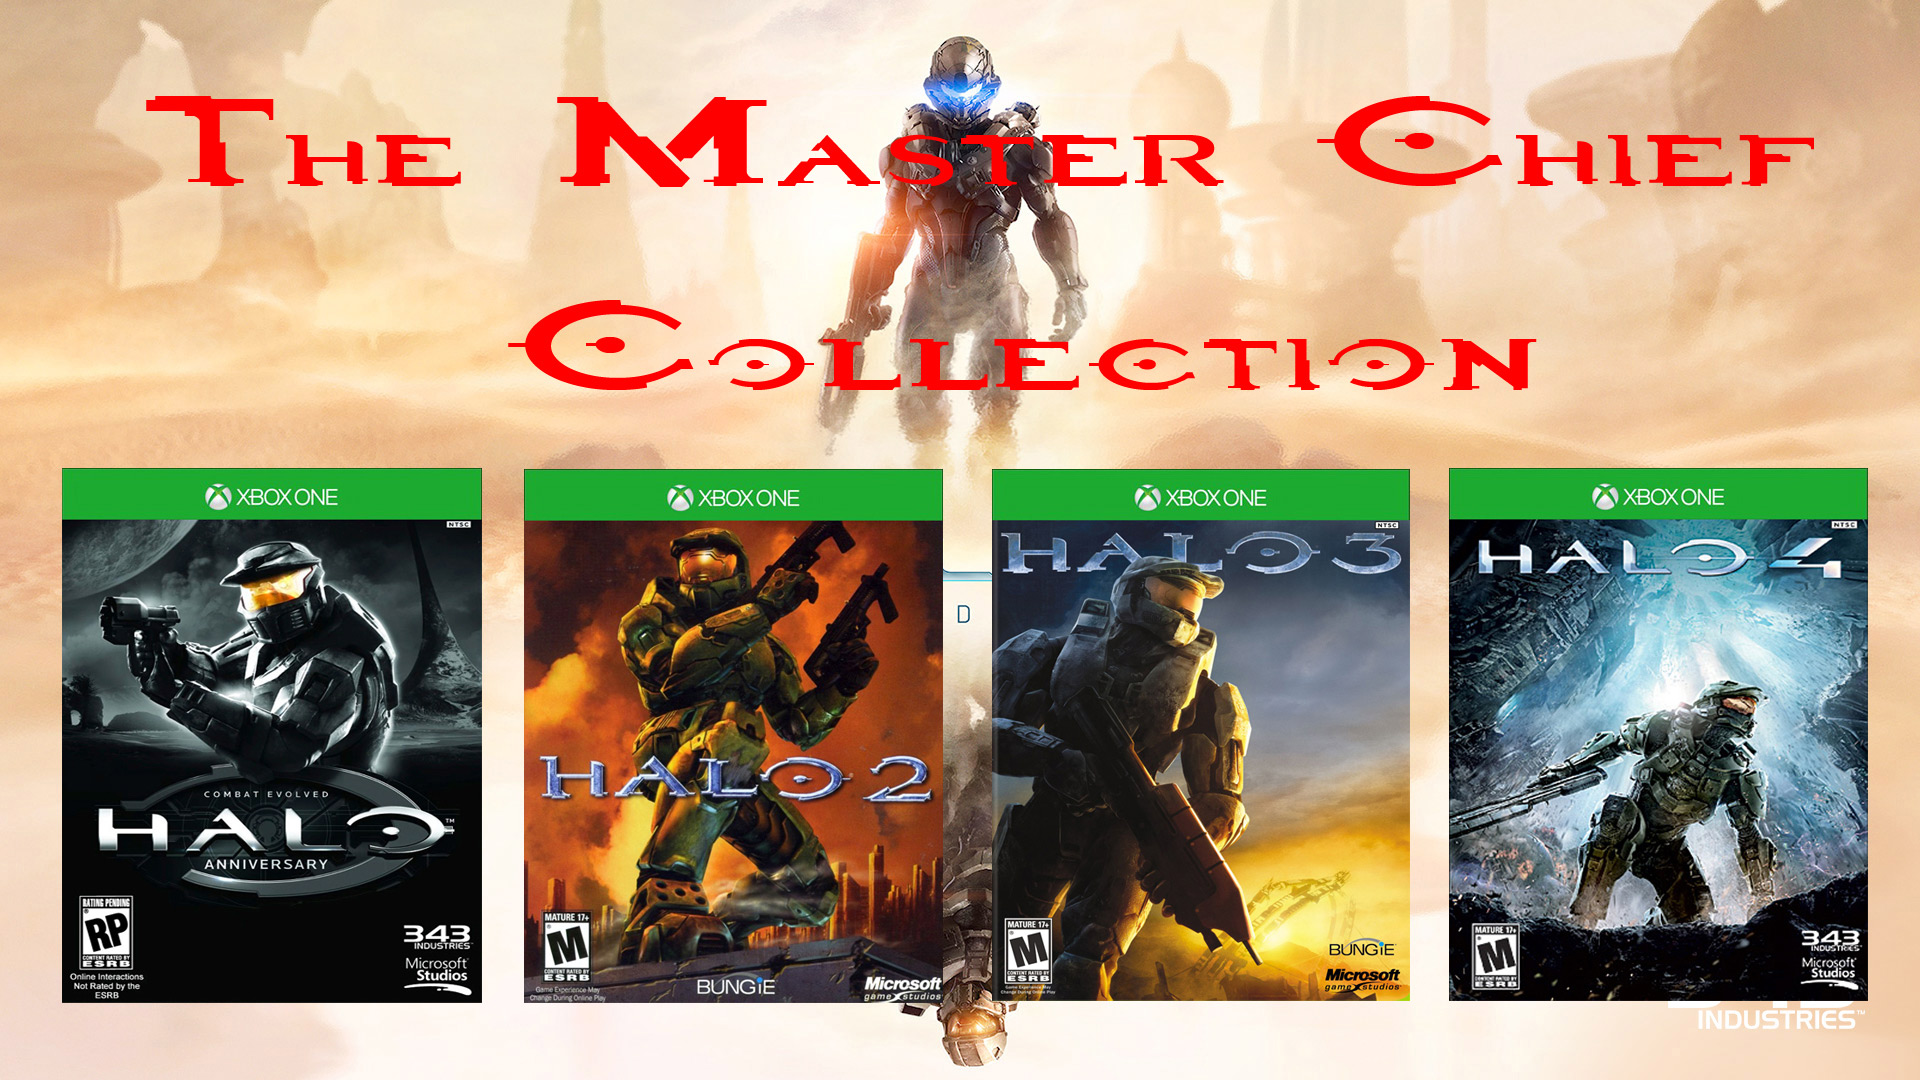 The Master Chief Collection